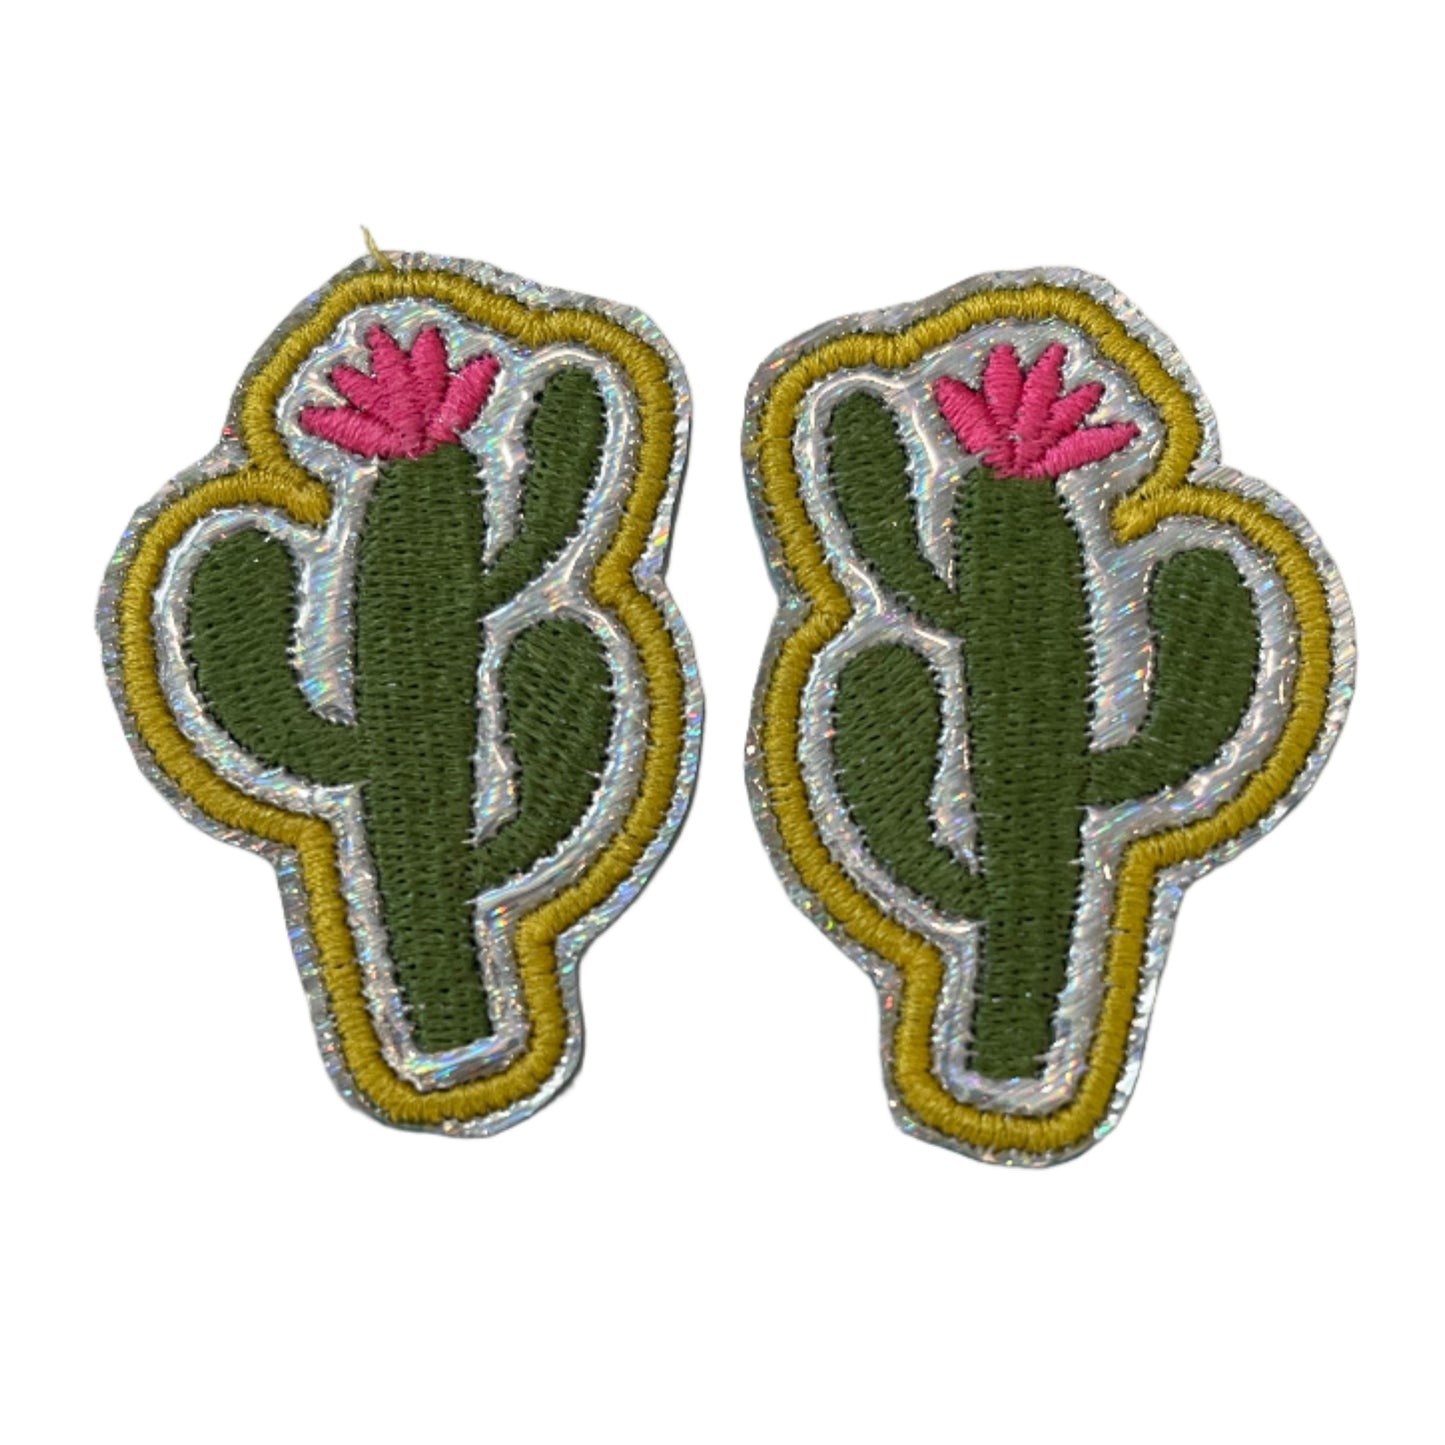 Trendy Cactus Patch with Pink Flower for Custom Hats, Apparel, and Accessories